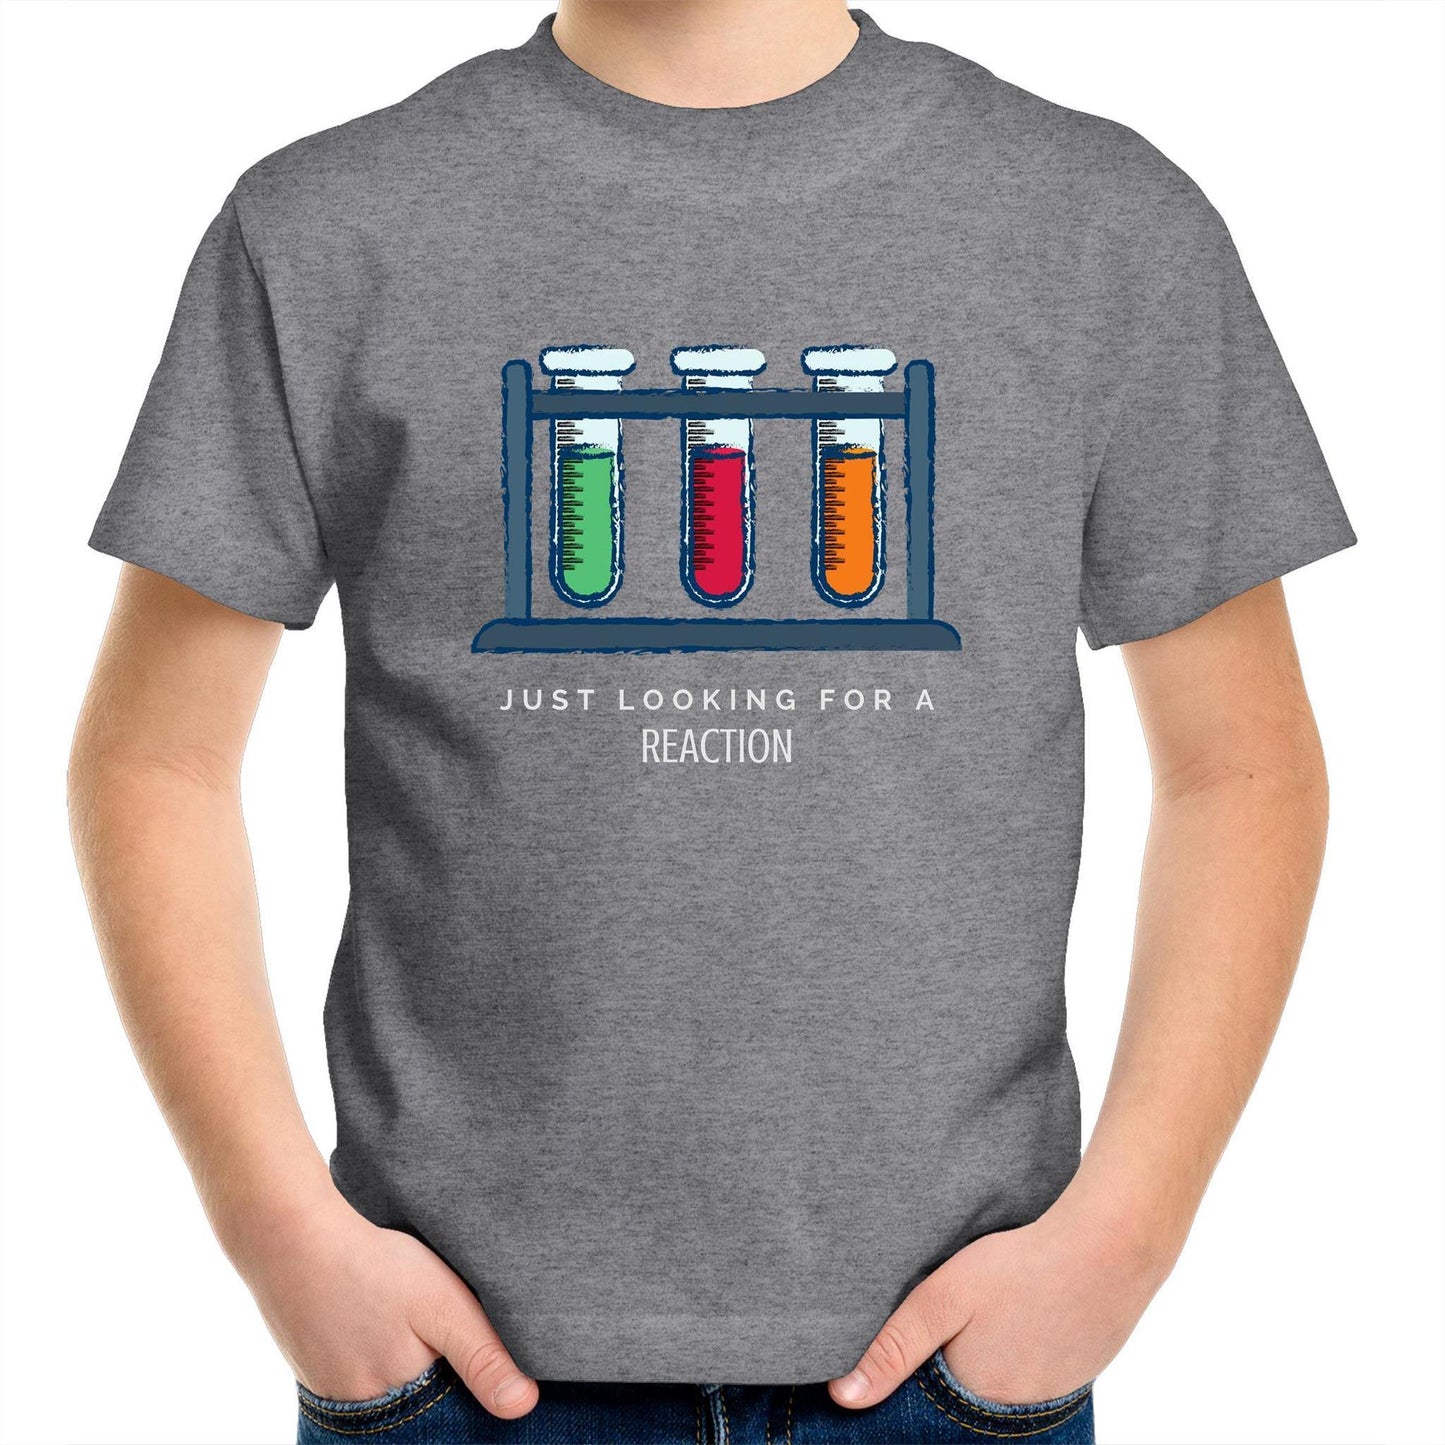 Test Tube, Just Looking For A Reaction - Kids Youth Crew T-Shirt Grey Marle Kids Youth T-shirt Science